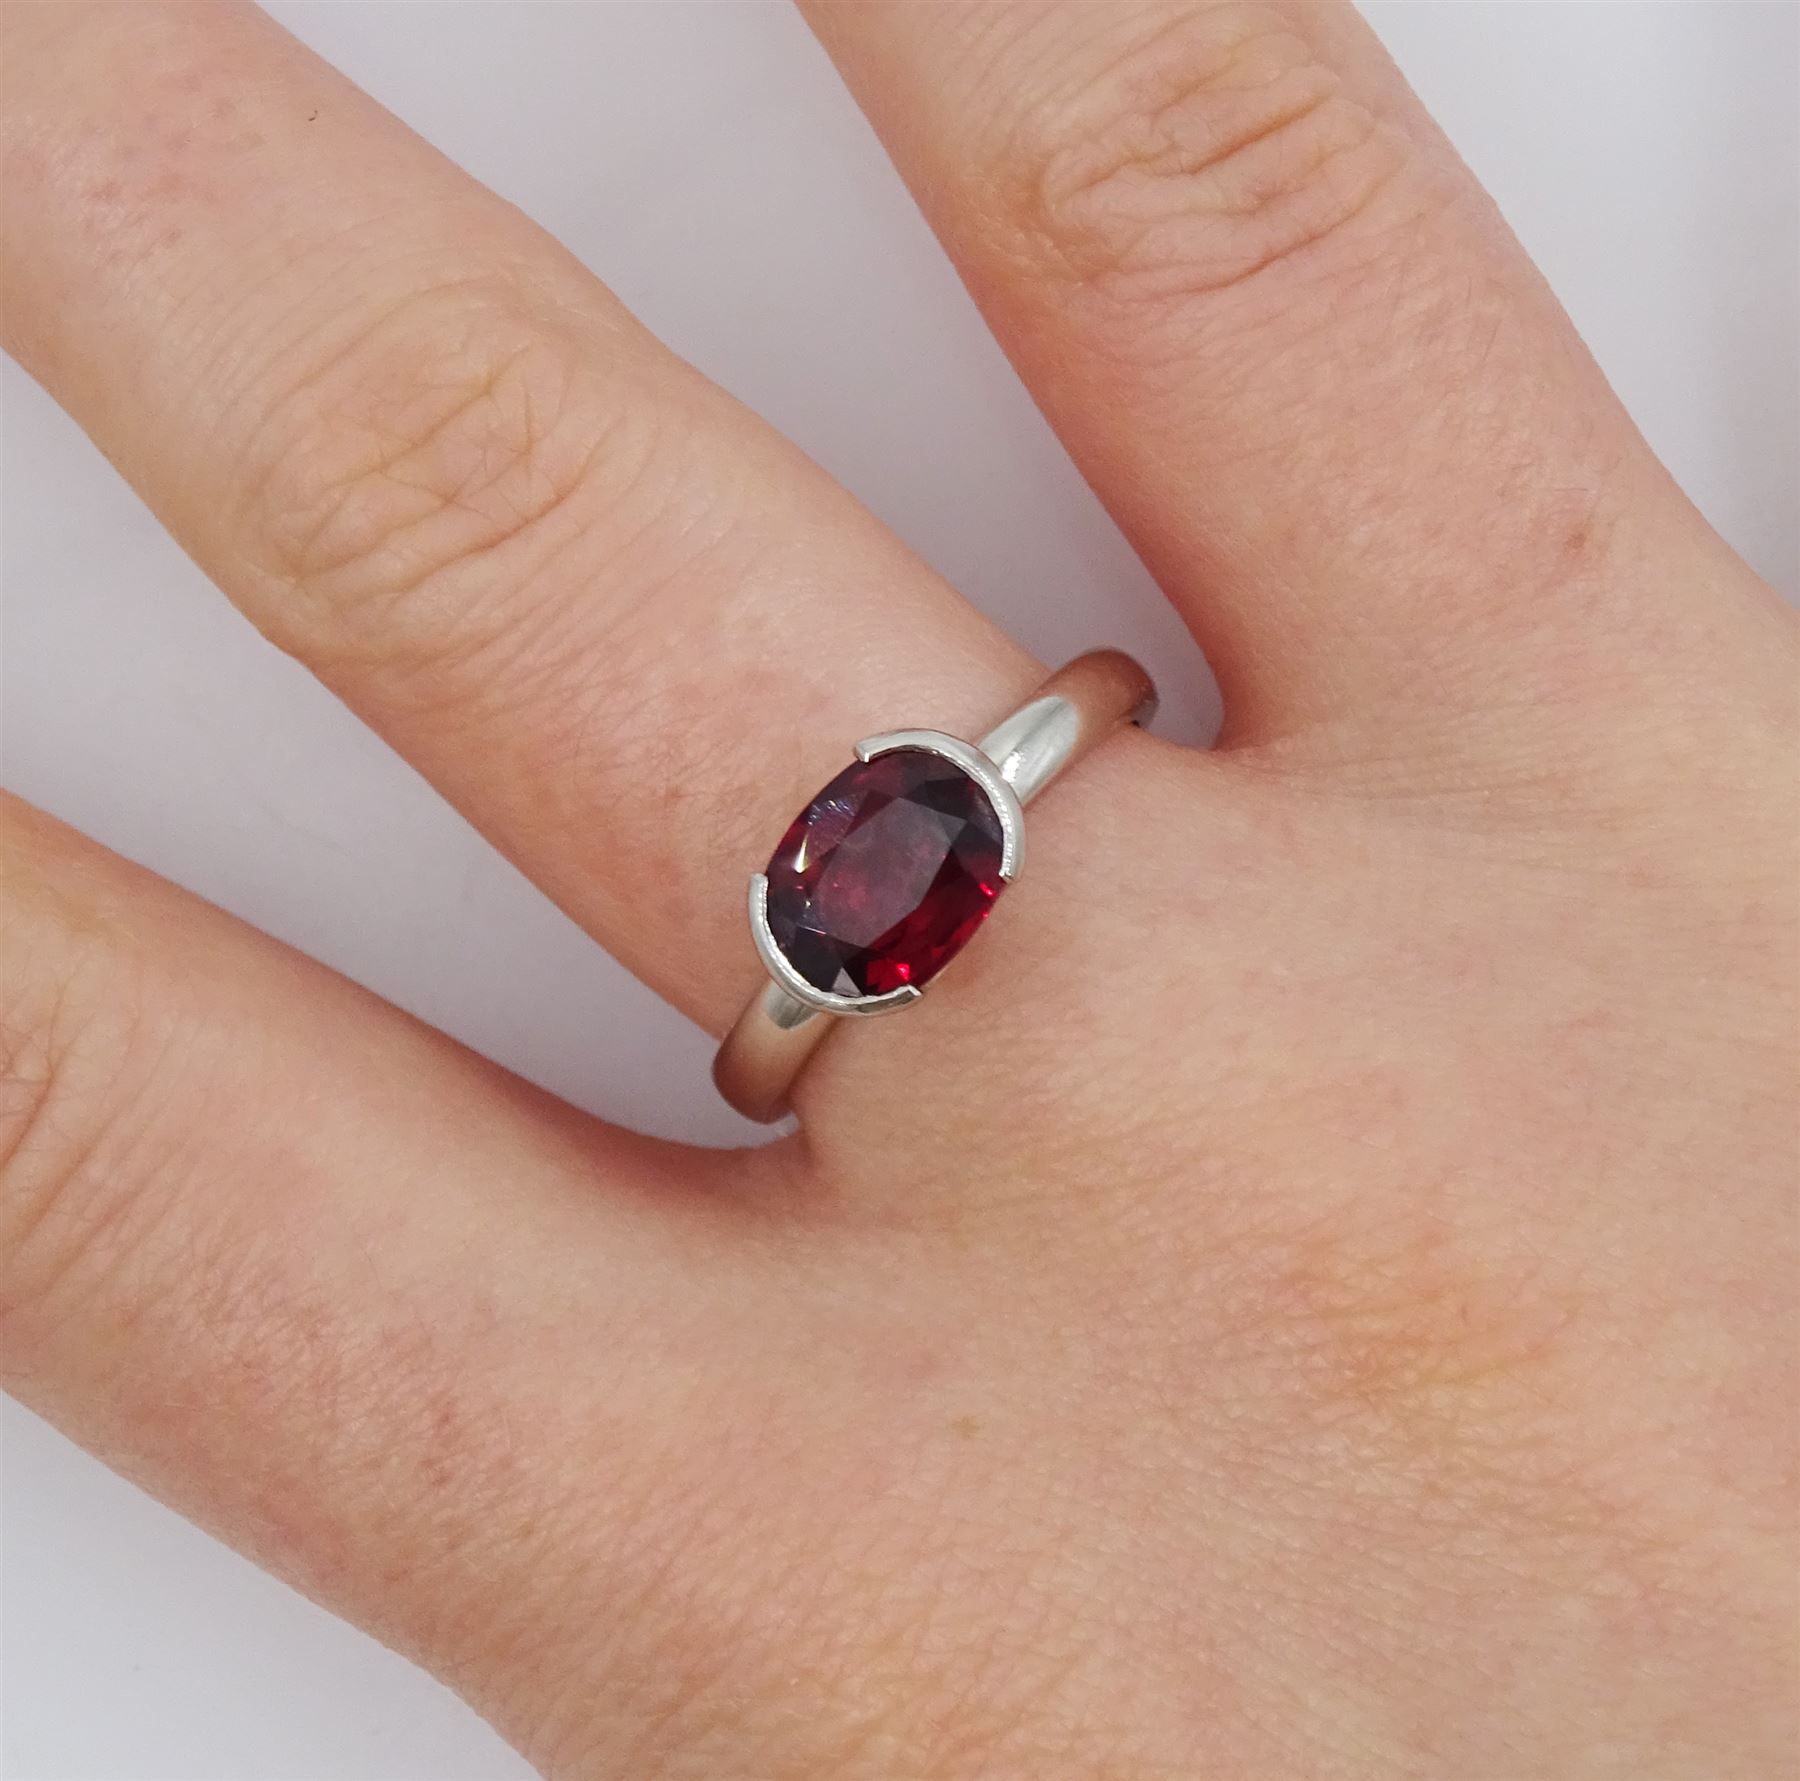 18ct white gold single stone ruby ring - Image 2 of 4